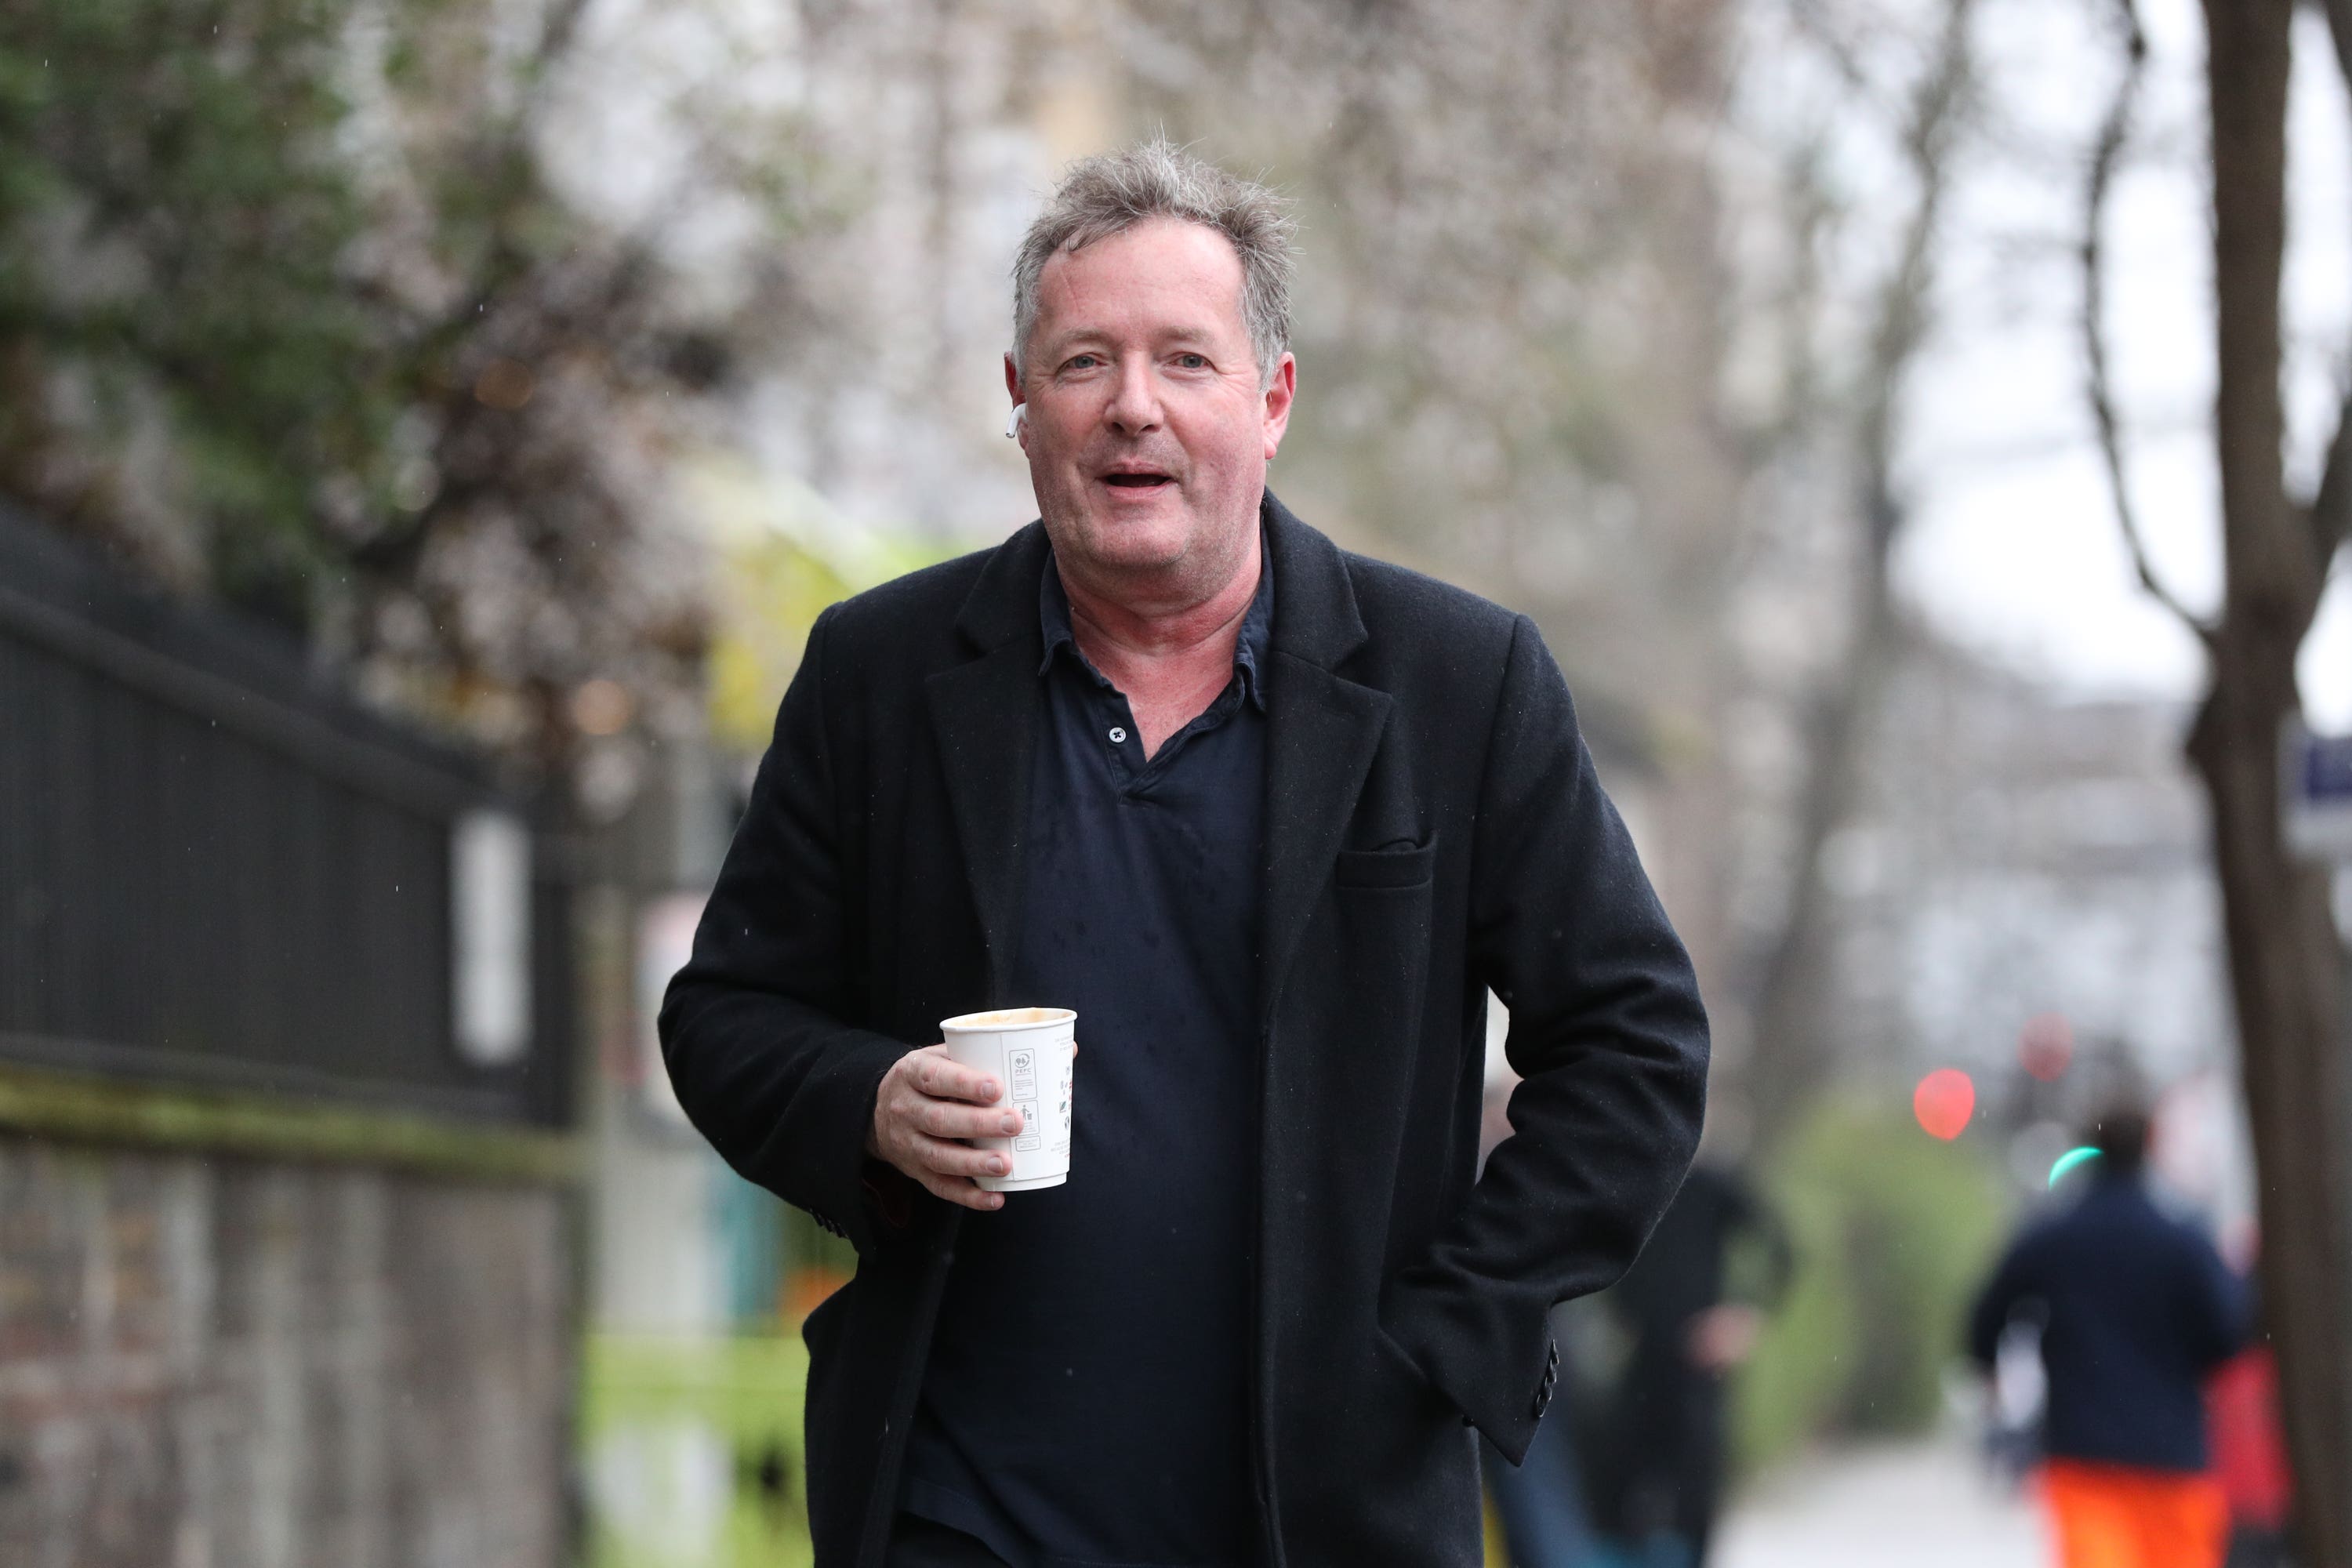 Piers Morgan has said he has ‘never told anybody to hack a phone’